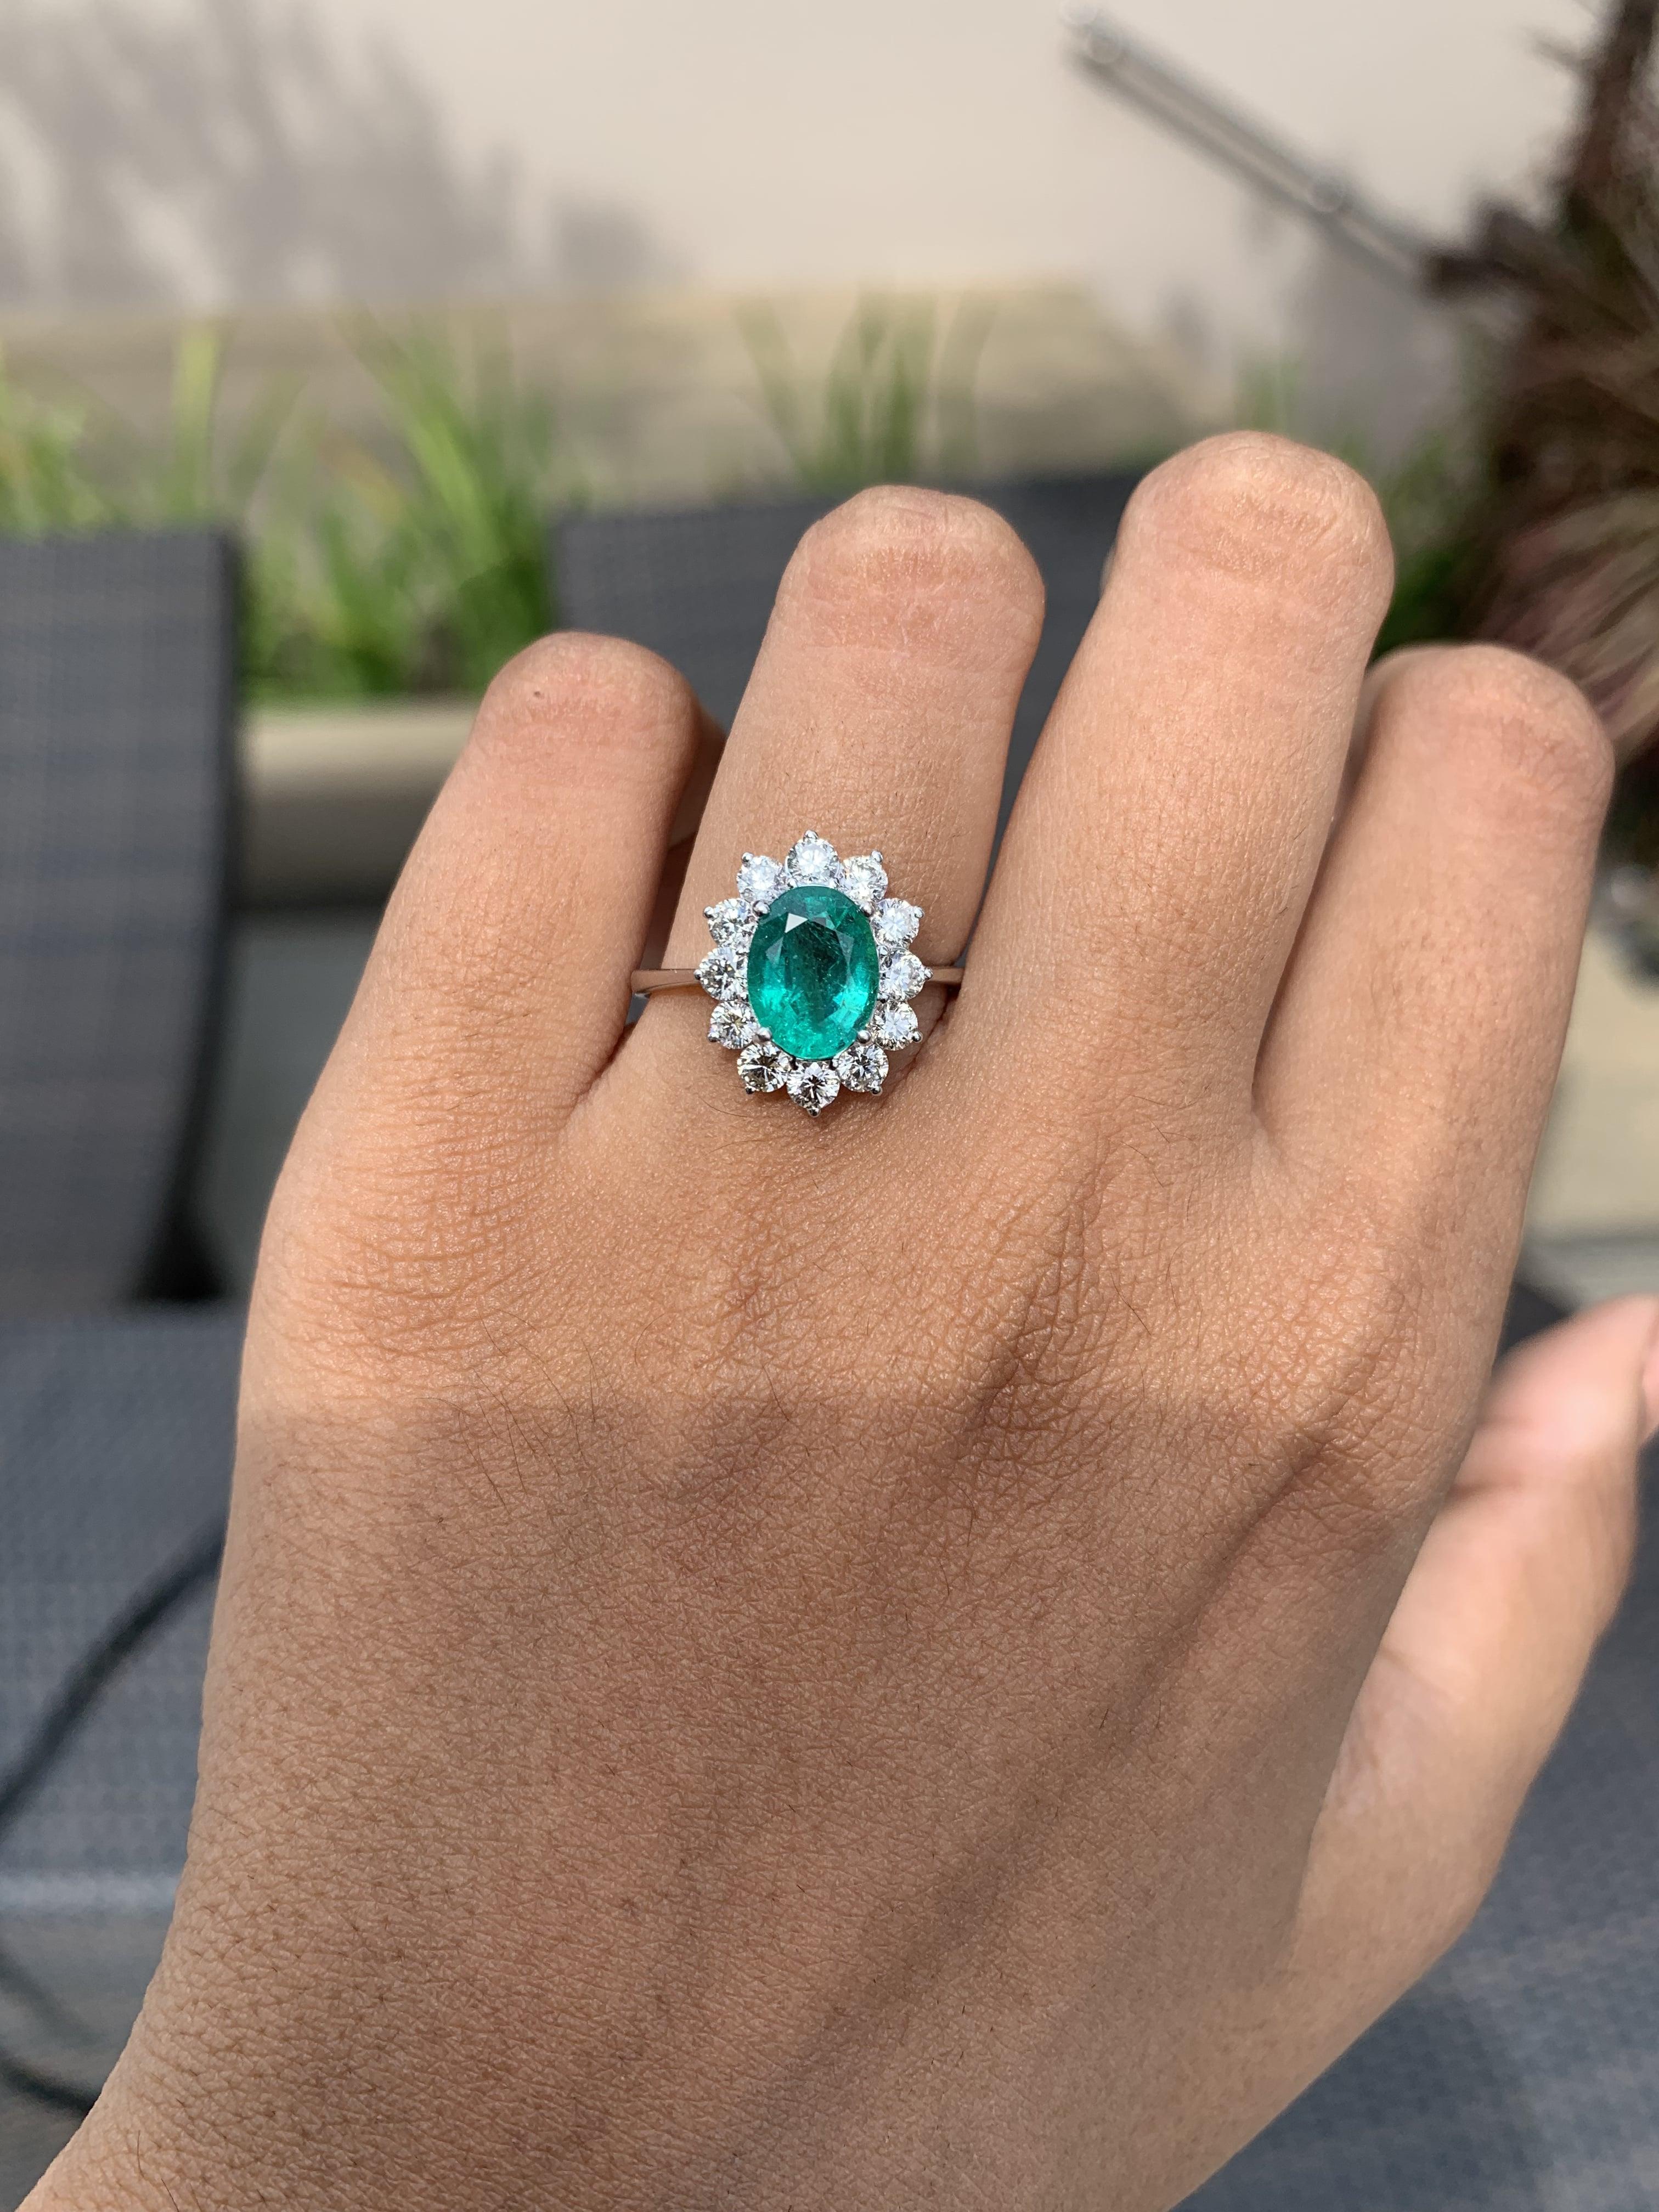 Victorian 1.64 Ct Vivid Green Zambian Emerald with Halo Diamonds 18K White Gold Ring For Sale